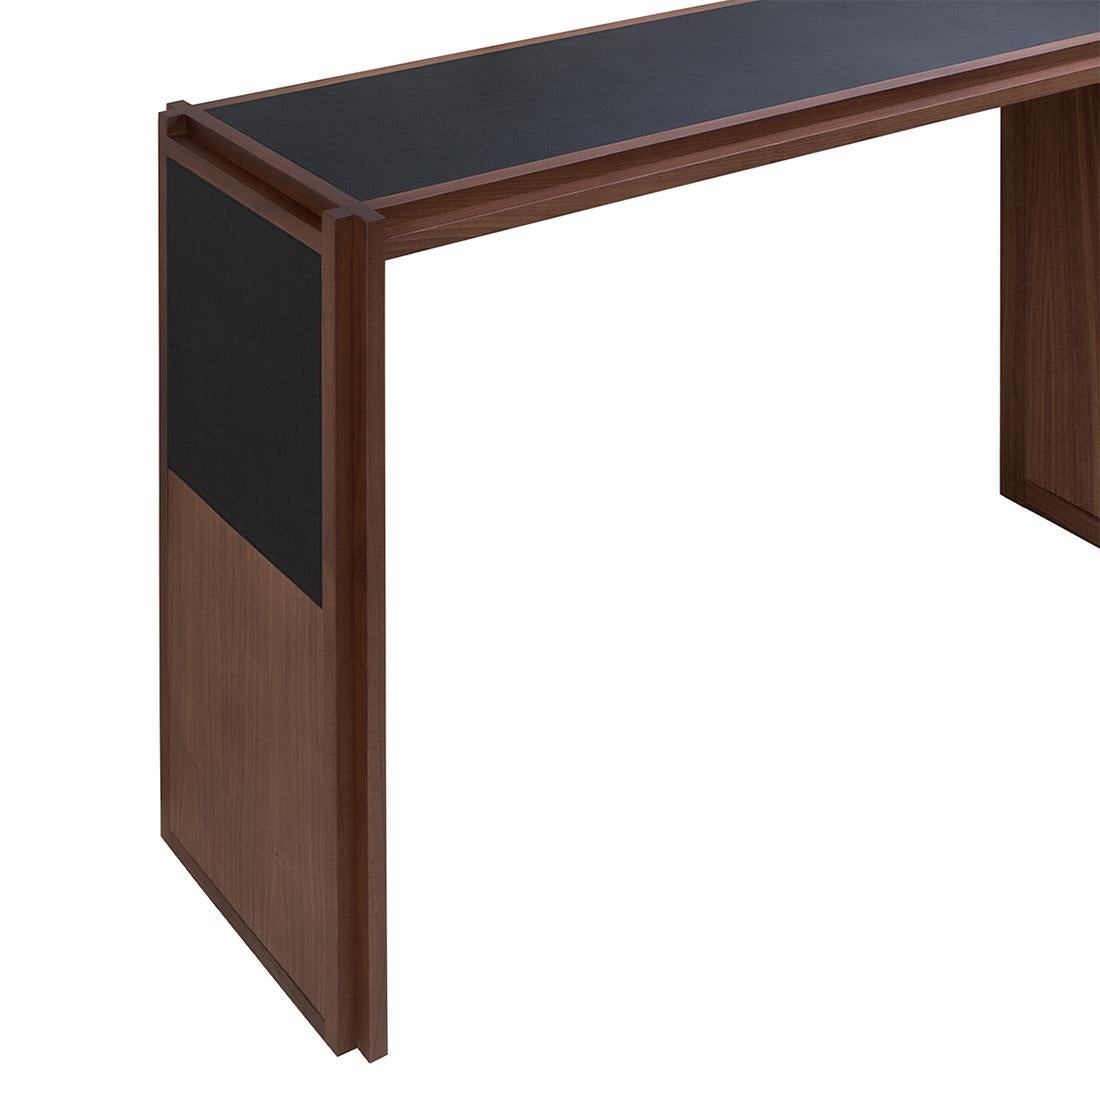 Console Table Straps Walnut with structure 
in solid walnut in natural walnut finish.
Top and feet's up parts made with genuine 
black leather. Also available with structure
in wenge stained finish.